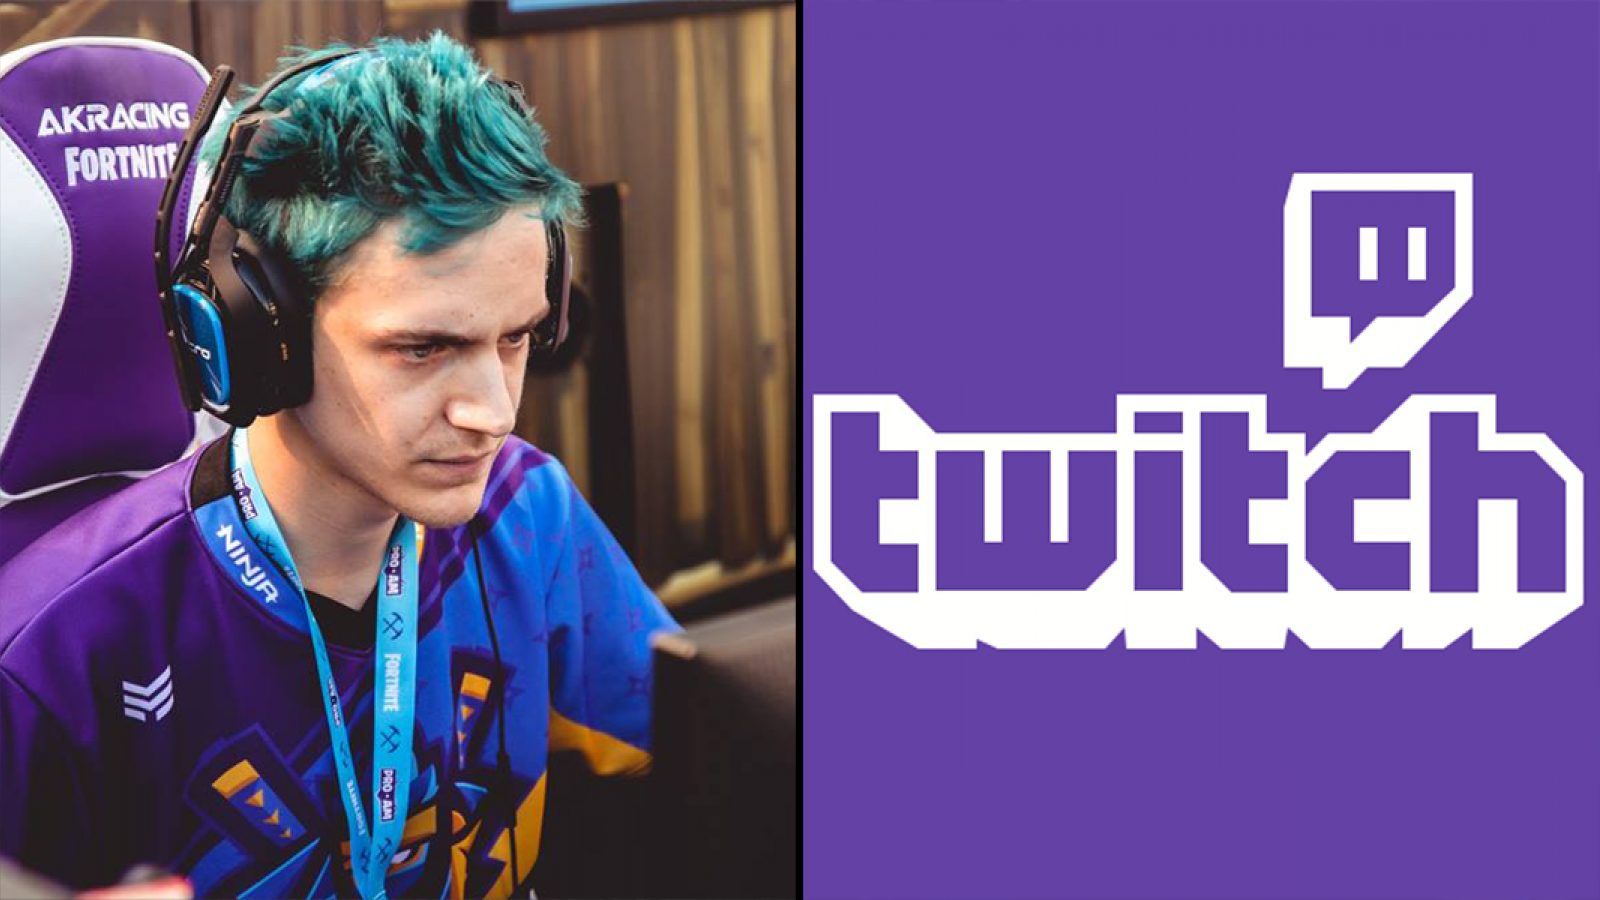 Ninja - The Famous Twitch Streamer at a Glance